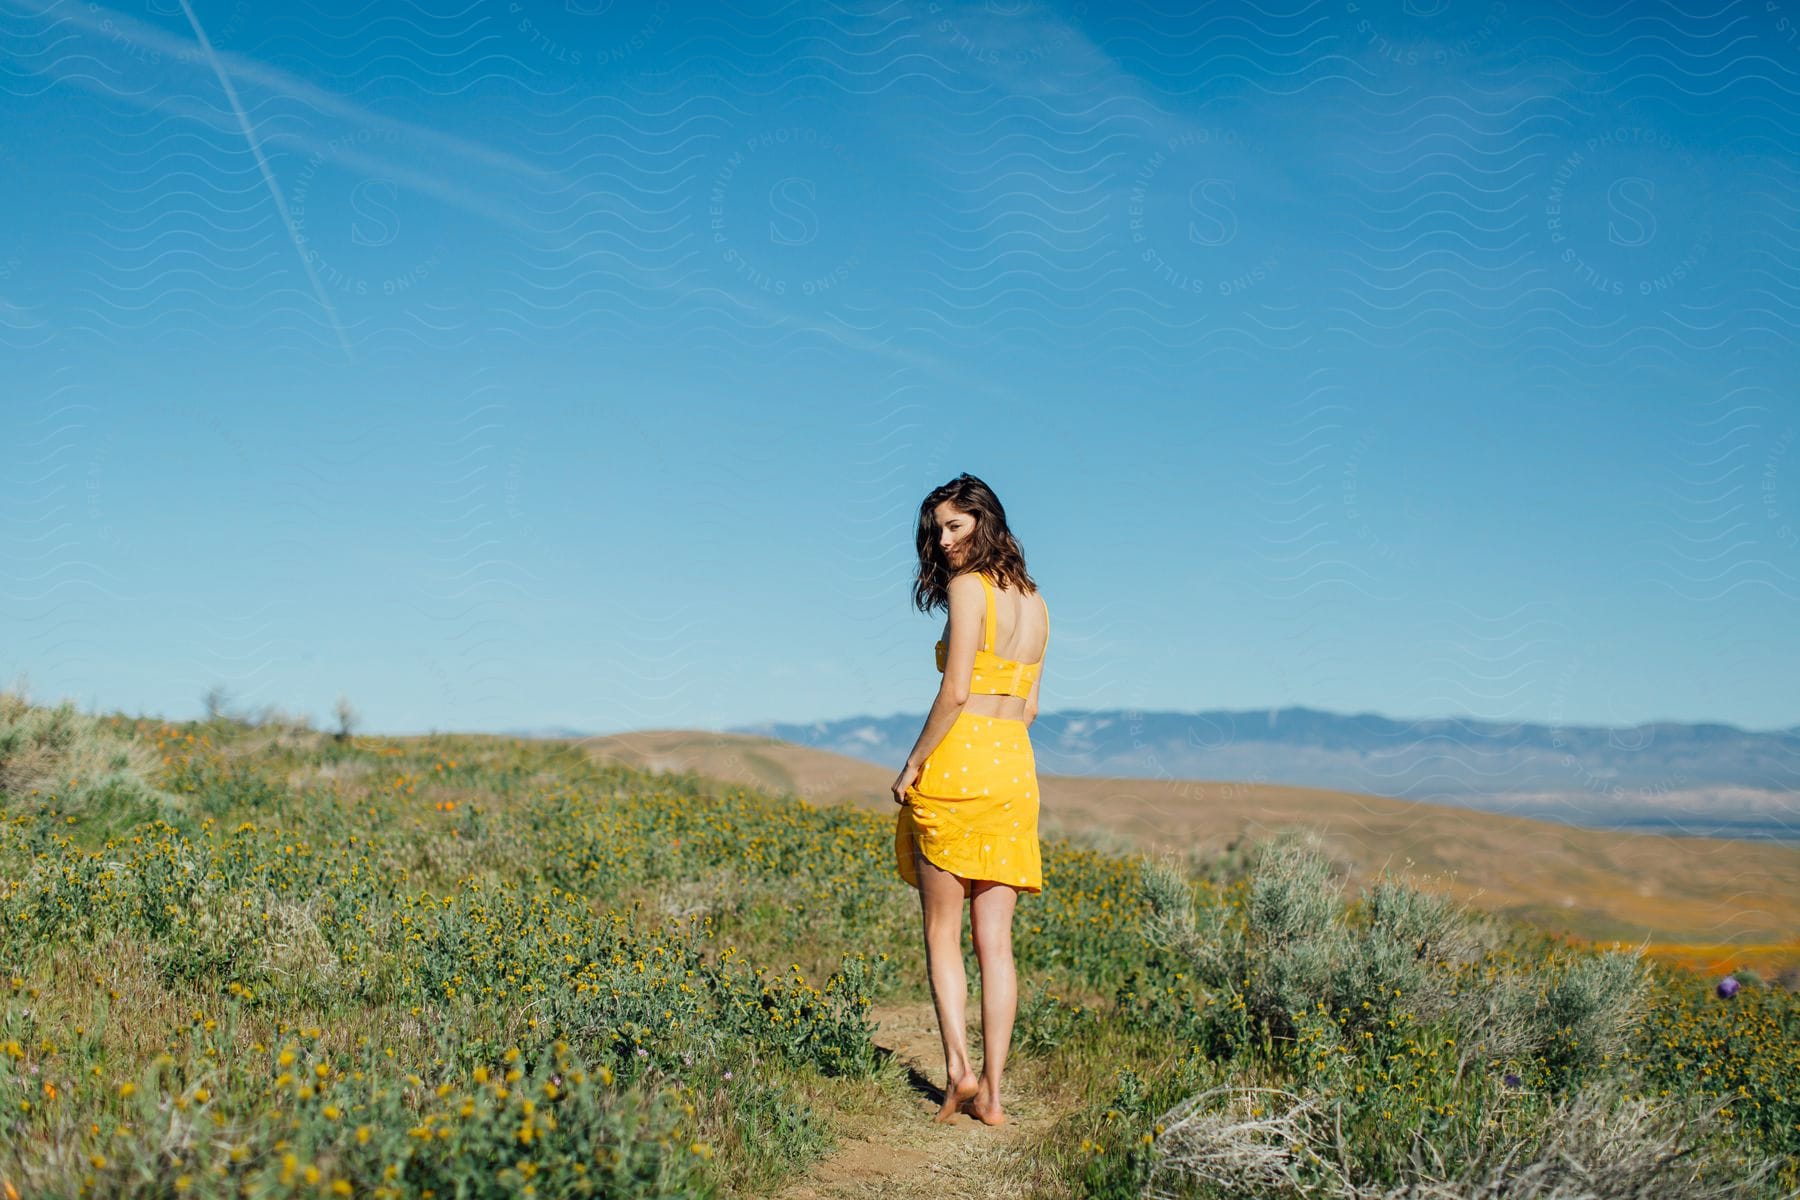 A young woman models a yellow sundress while walking on a hillside trail on a summer day.